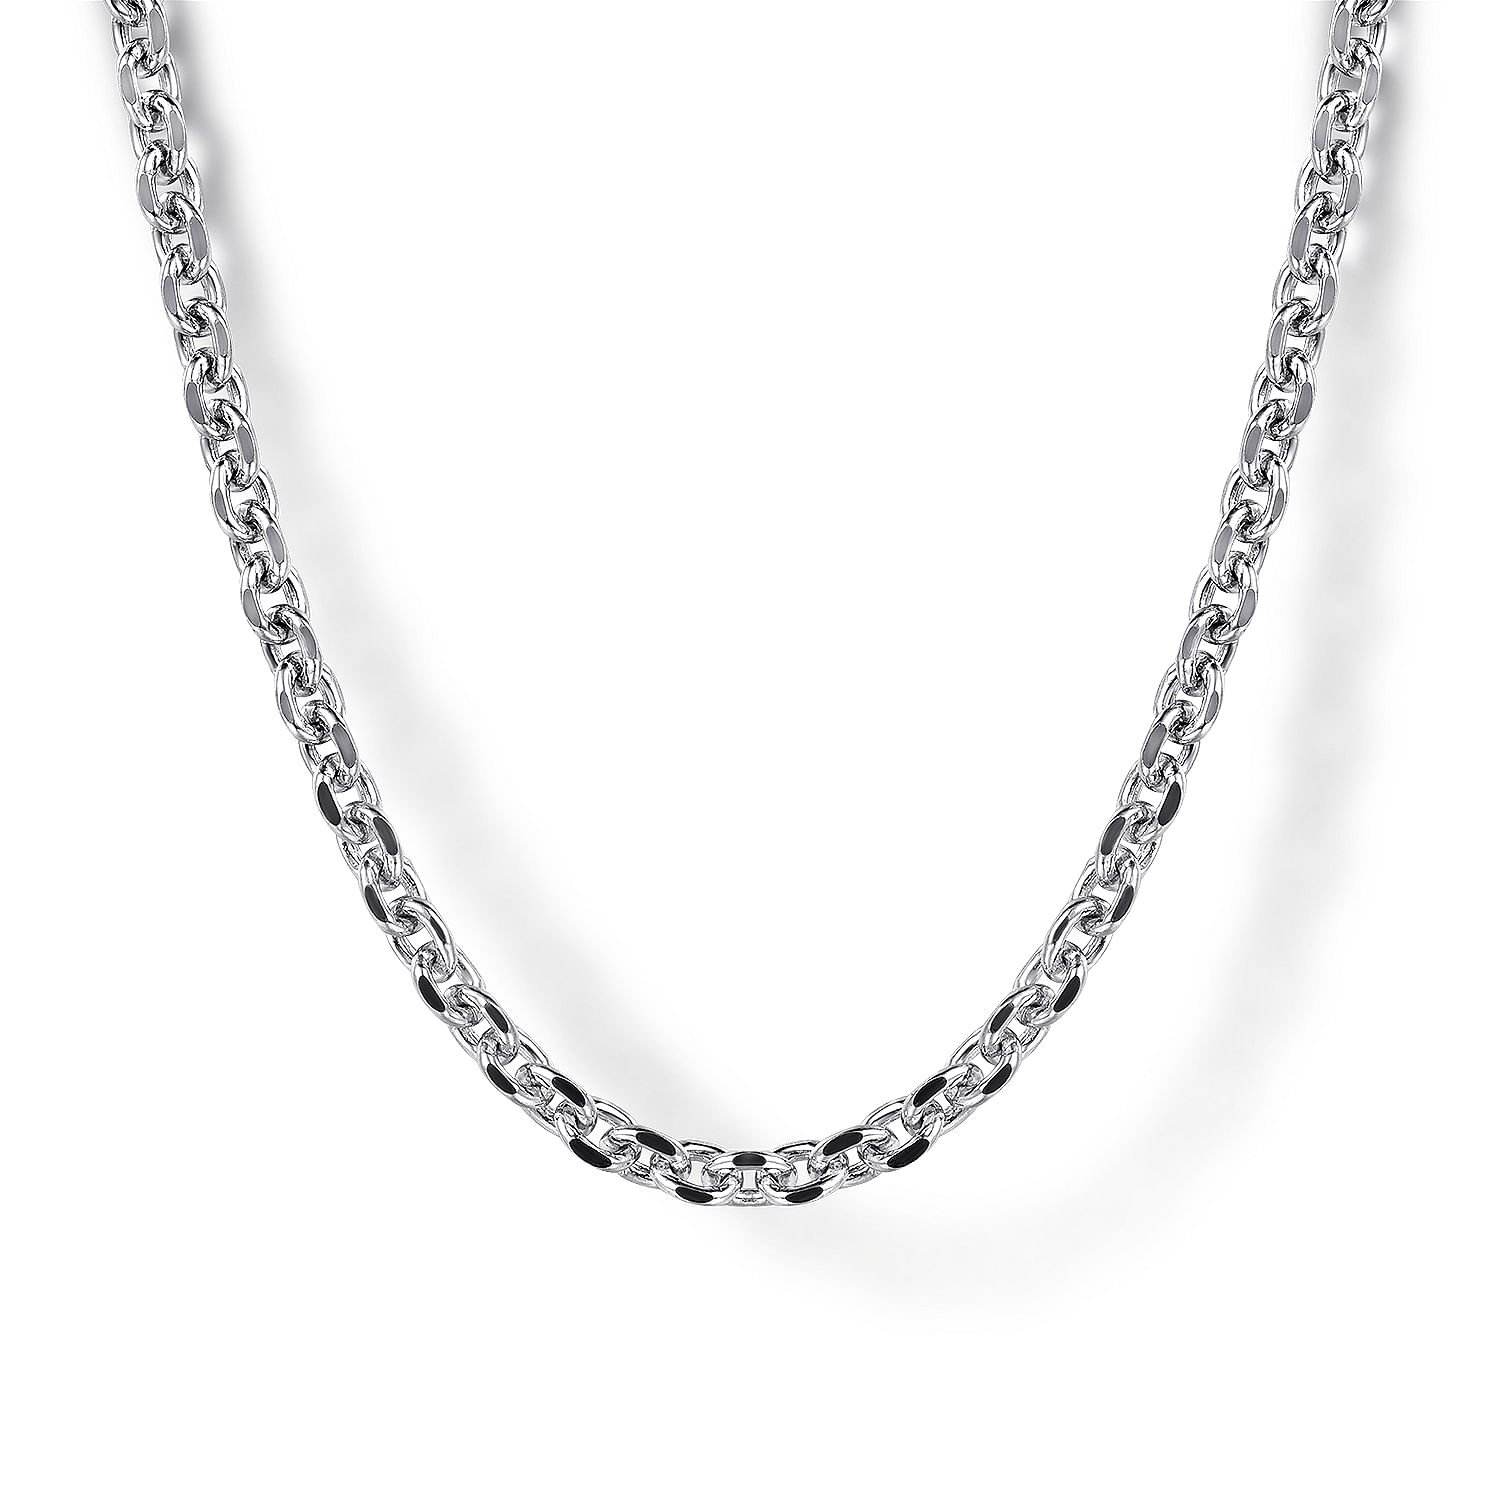 20 Inch 925 Sterling Silver Men's Link Chain Necklace | Shop 925